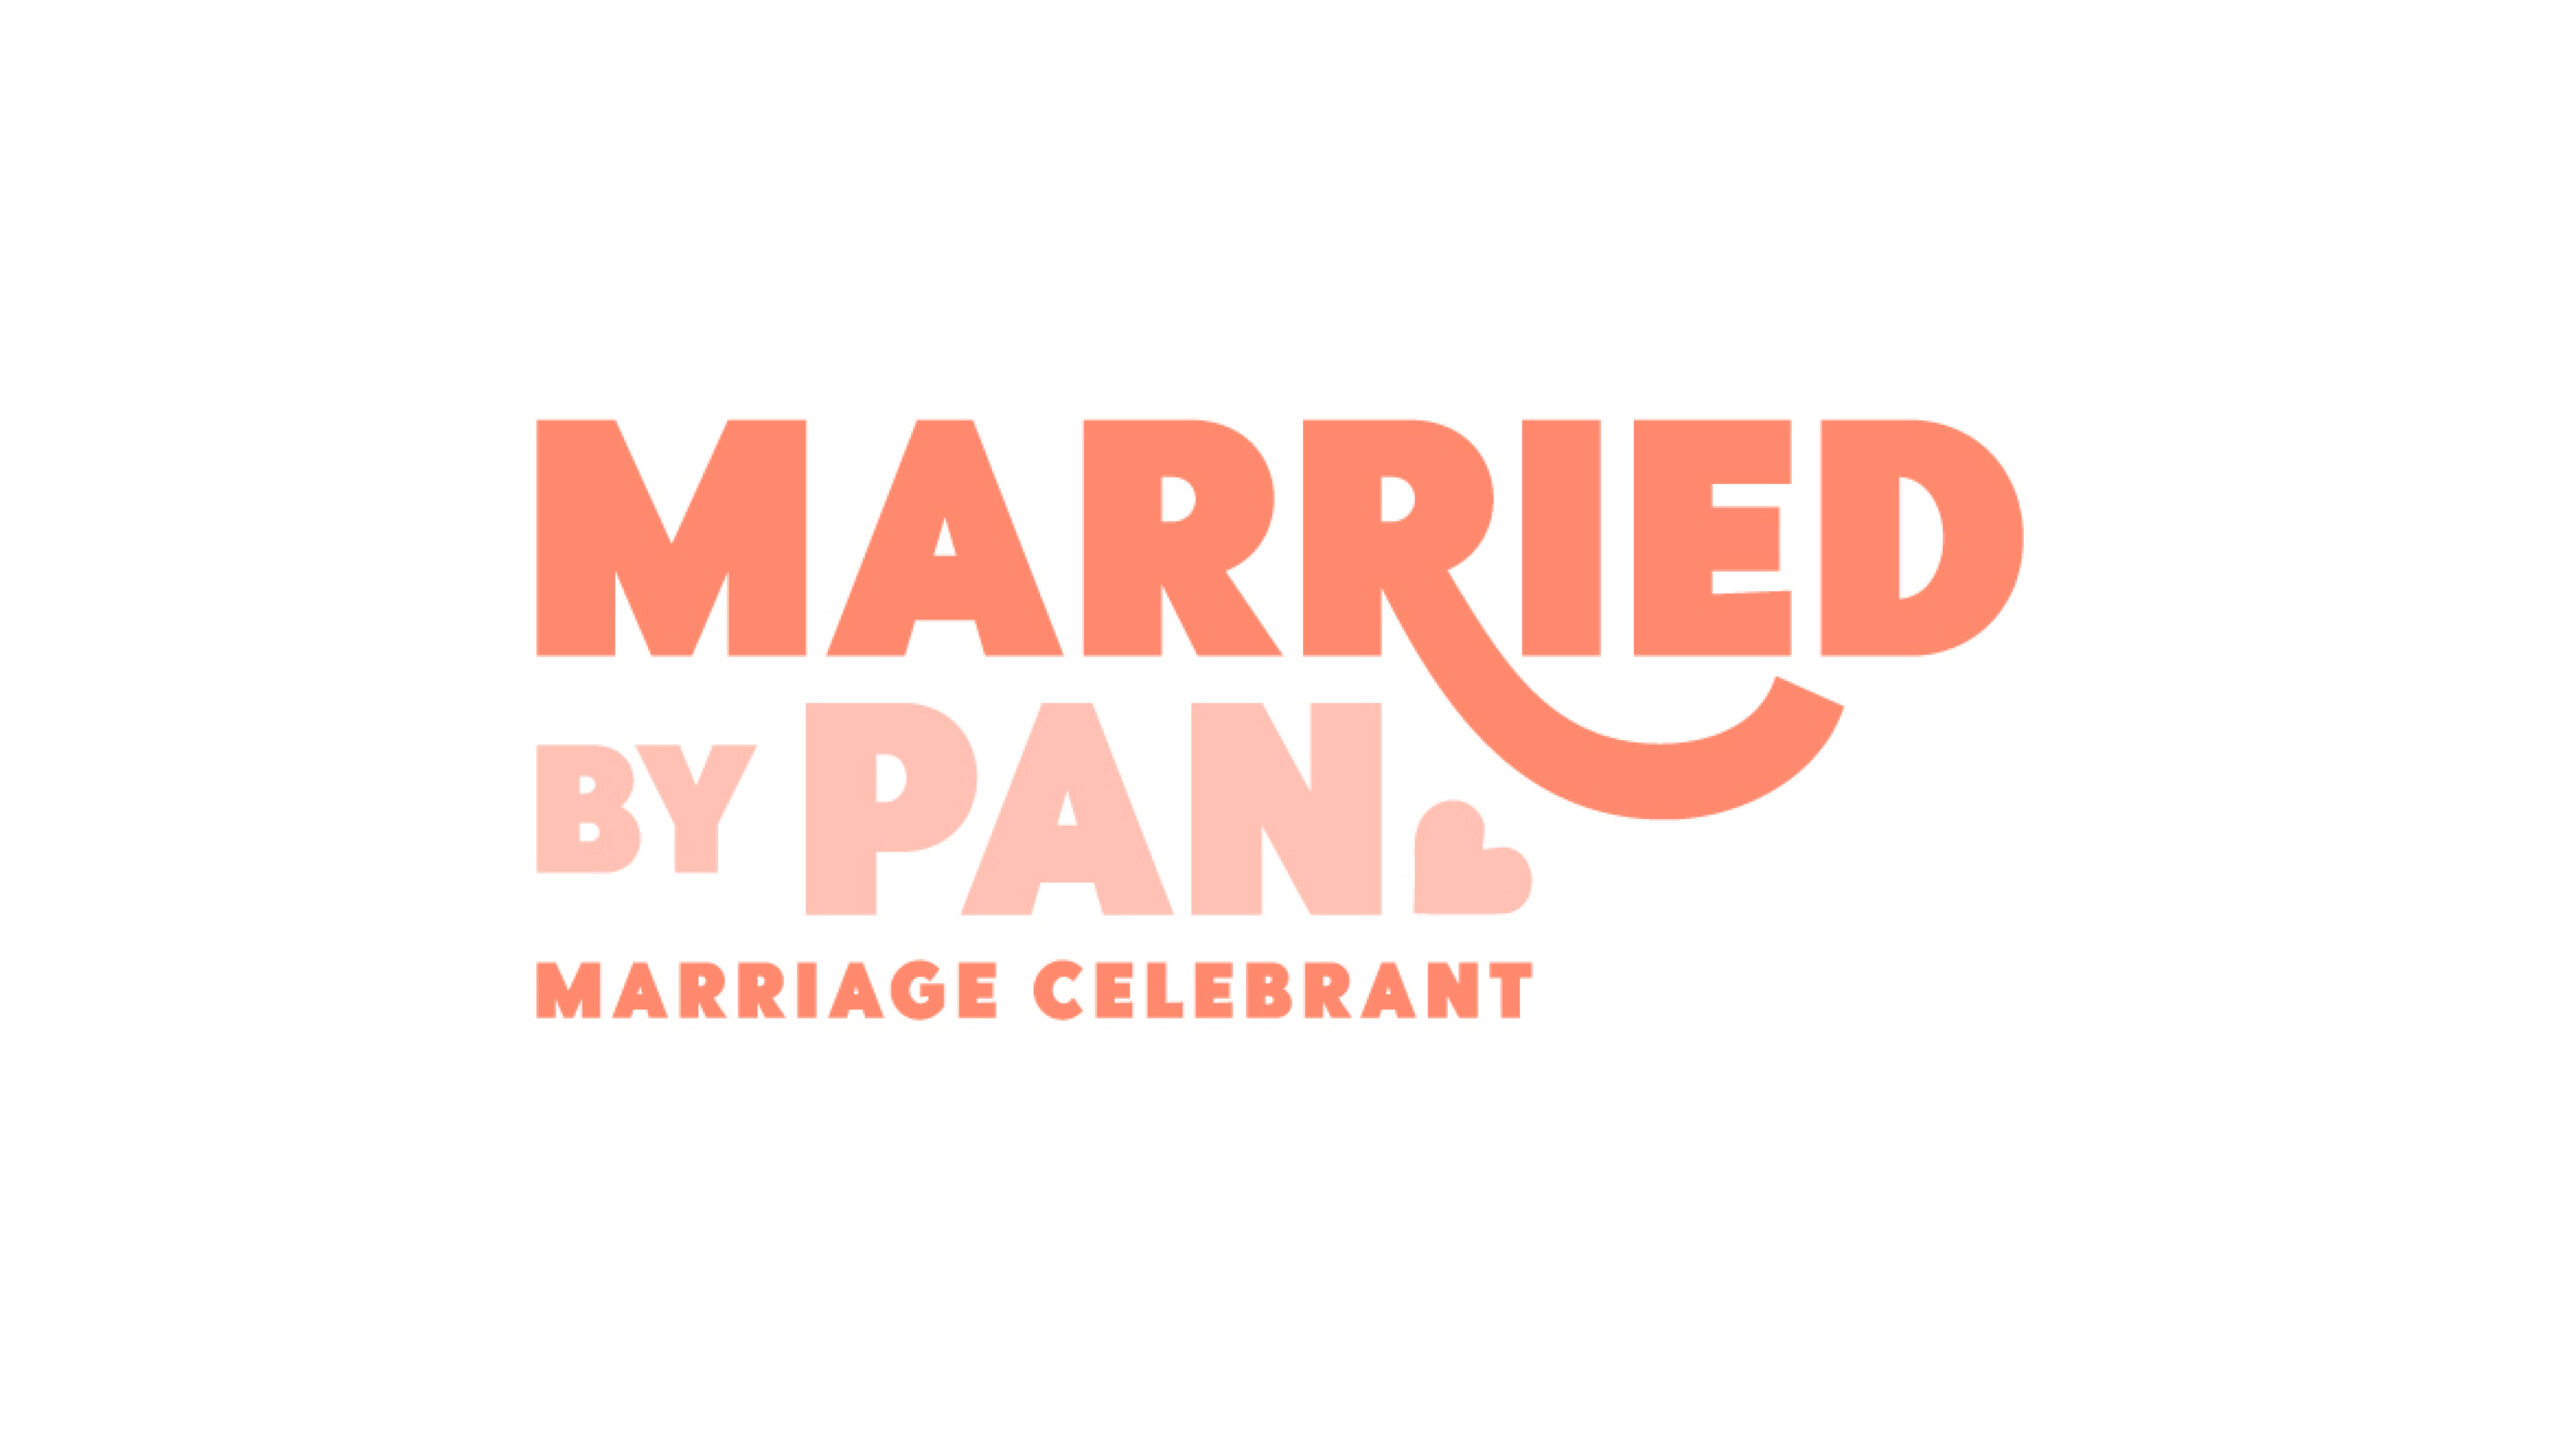 Married By Pan